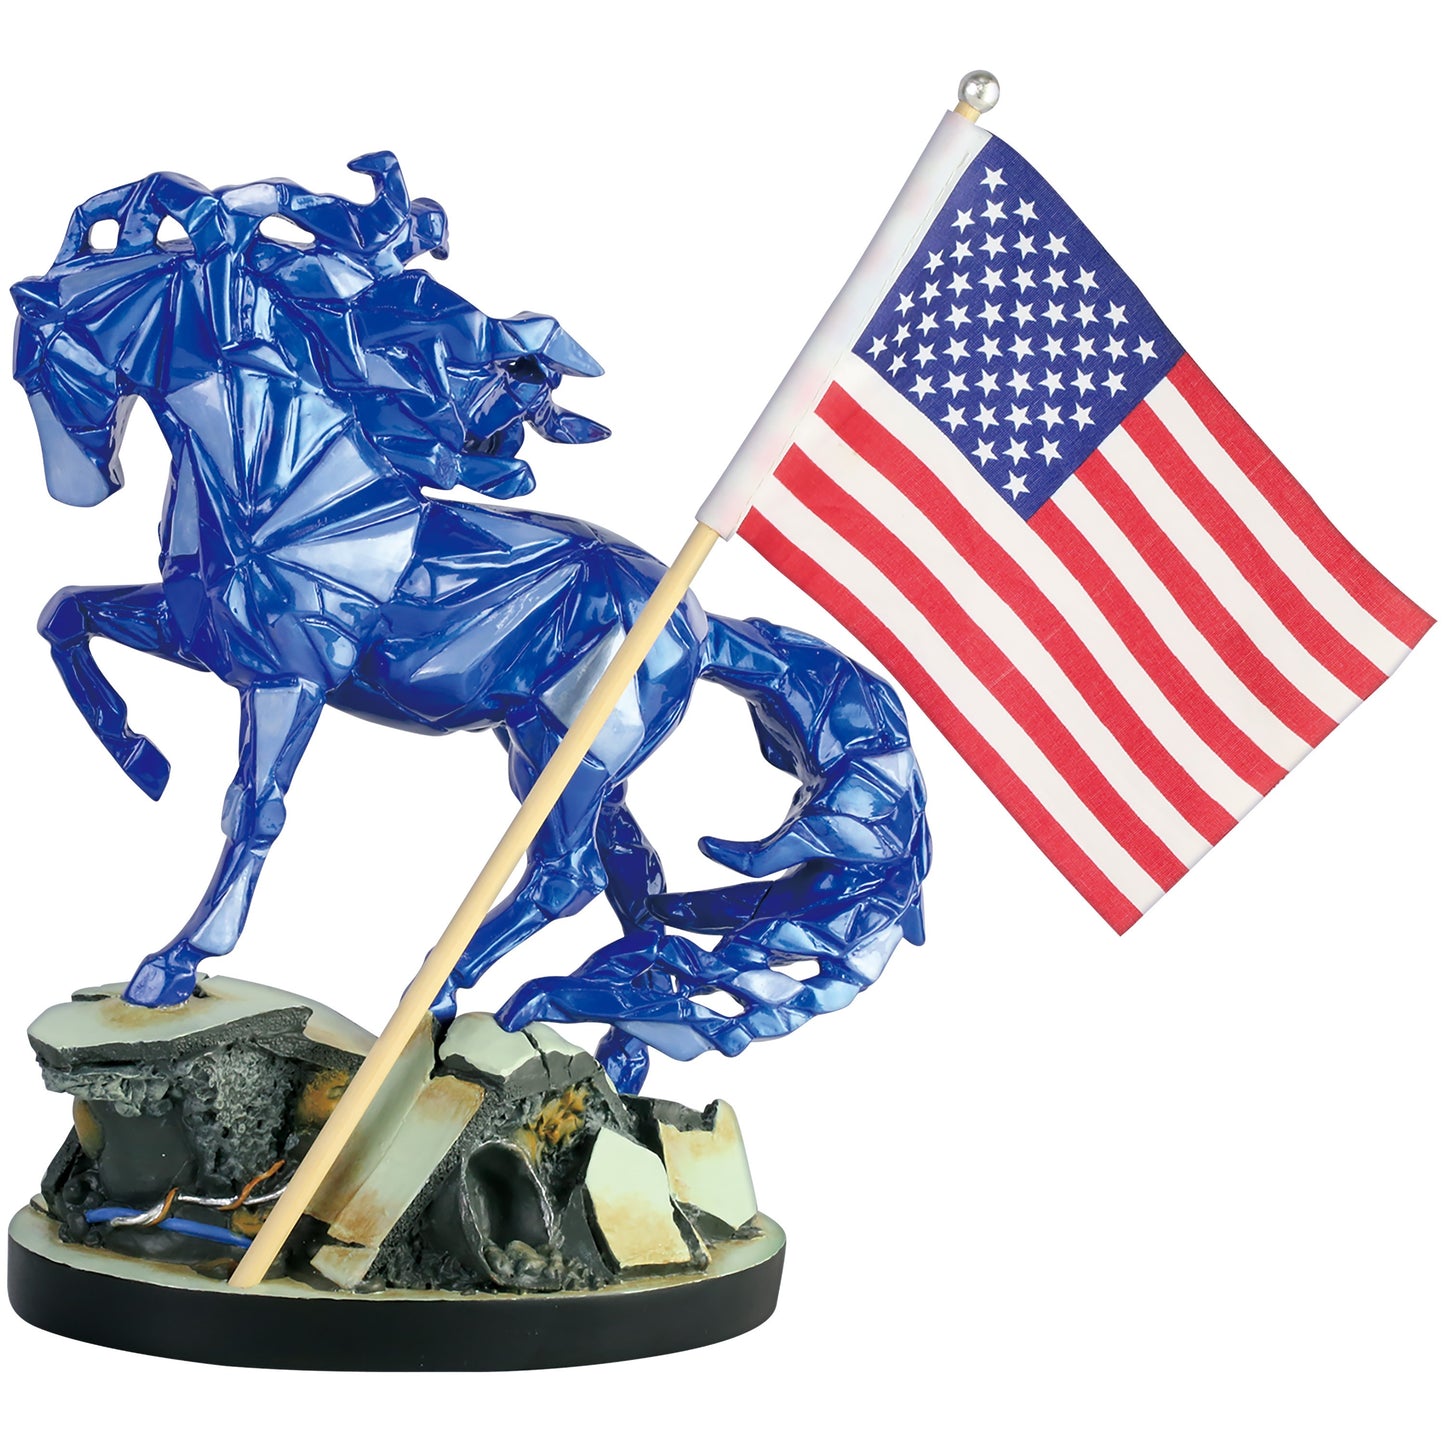 Wild Blue - Remembering 9/11 - Standard Edition